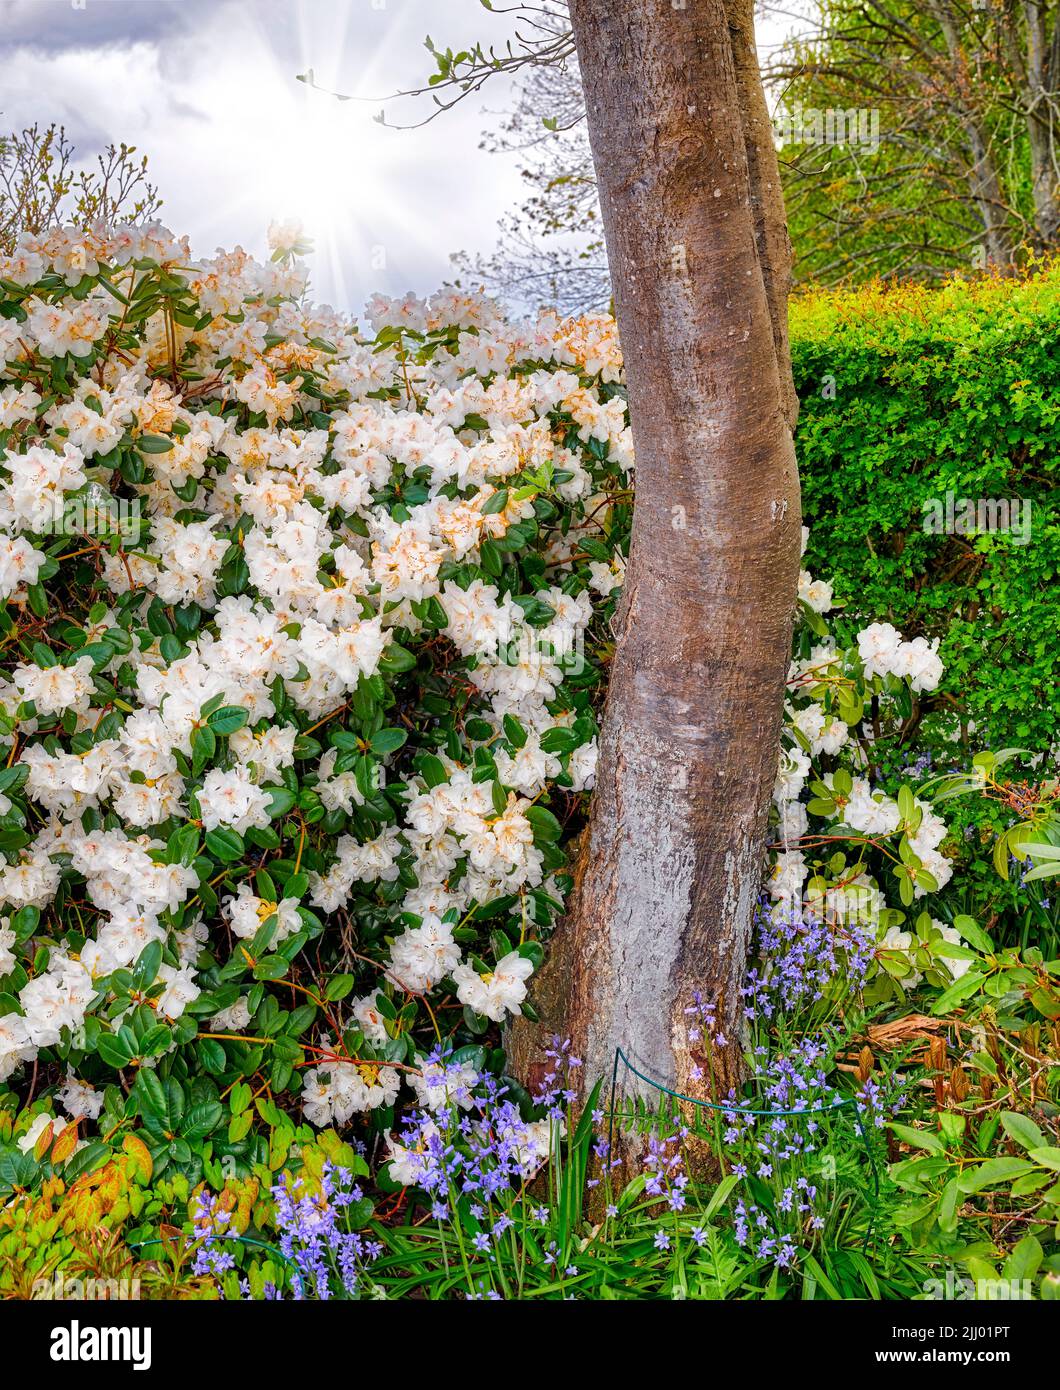 Rhododendron Dora Amateis blooming in a magical garden with a bright sunbeam in the cloudy sky. Beautiful white flowers blossoming in a bush near a Stock Photo